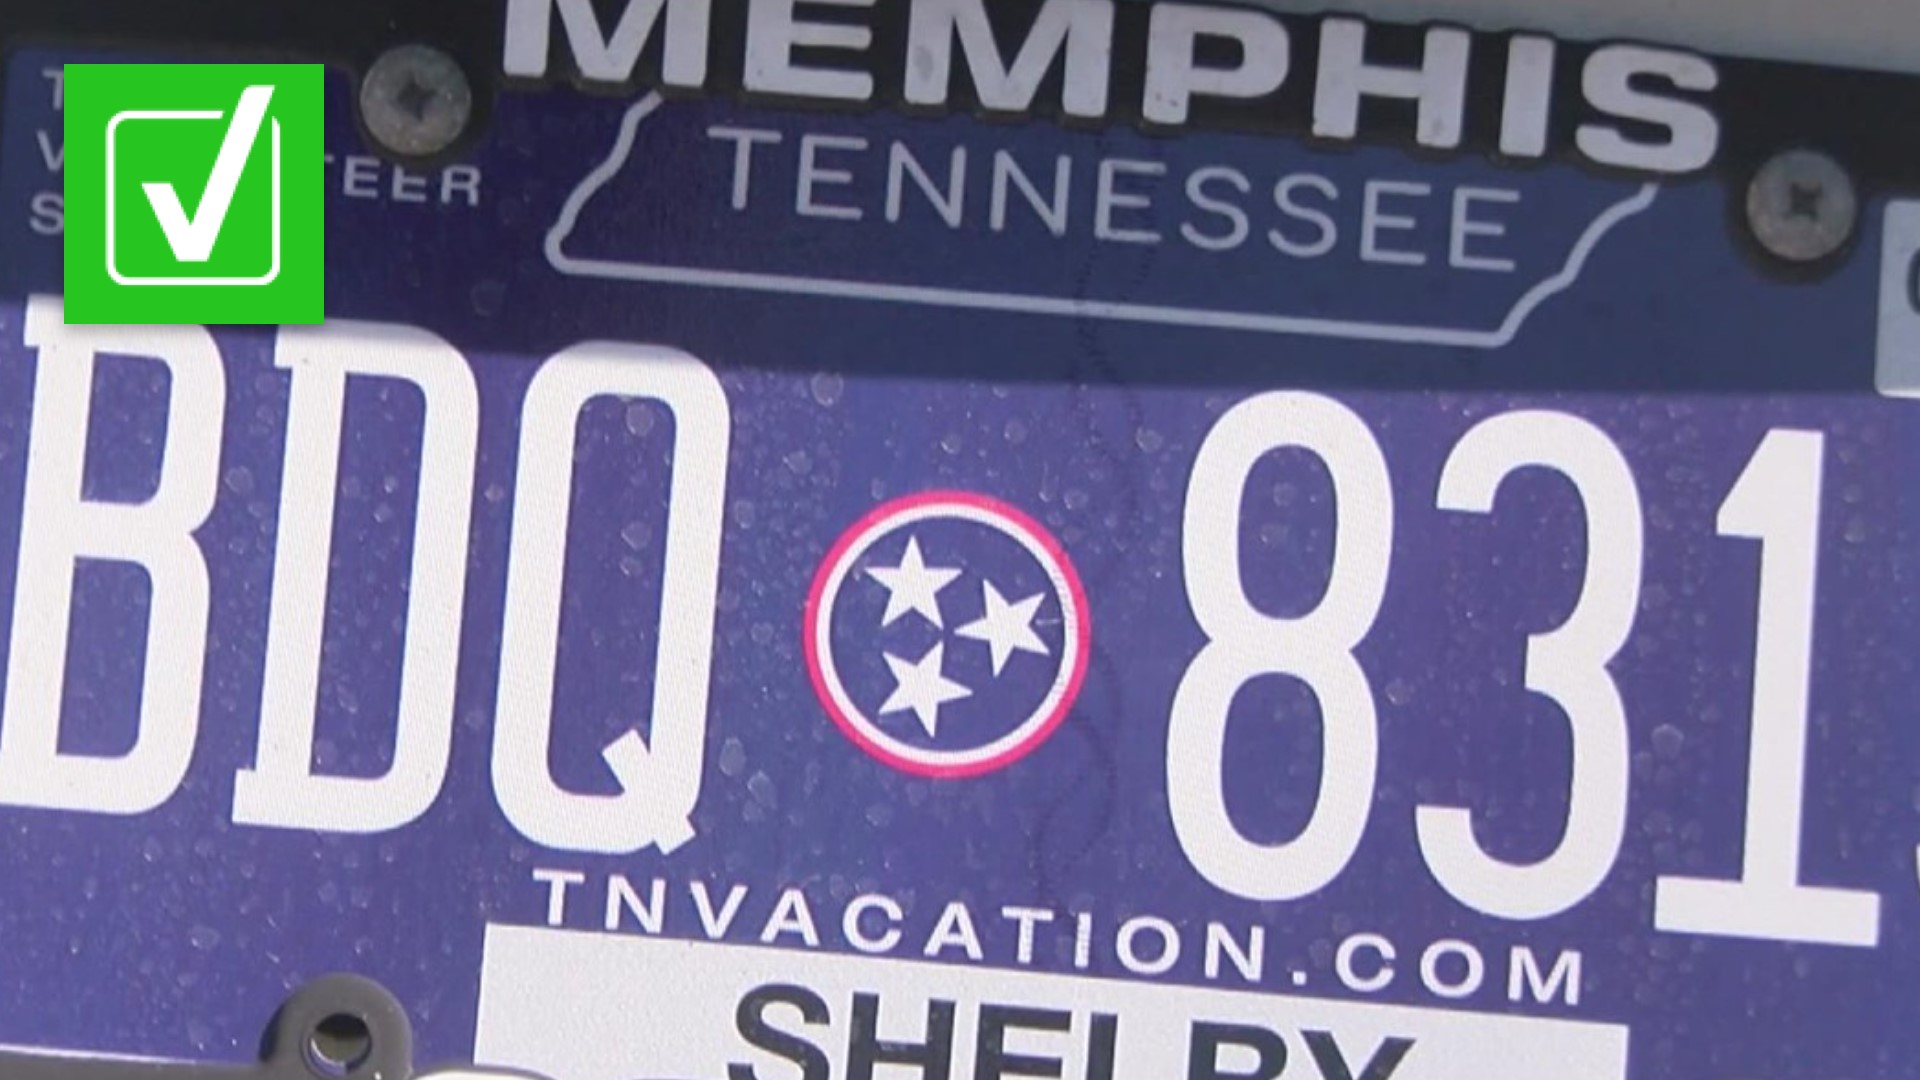 Tennessee's first new license plates since 2006 continue to cause major backlogs for the Shelby County Clerk's Office.